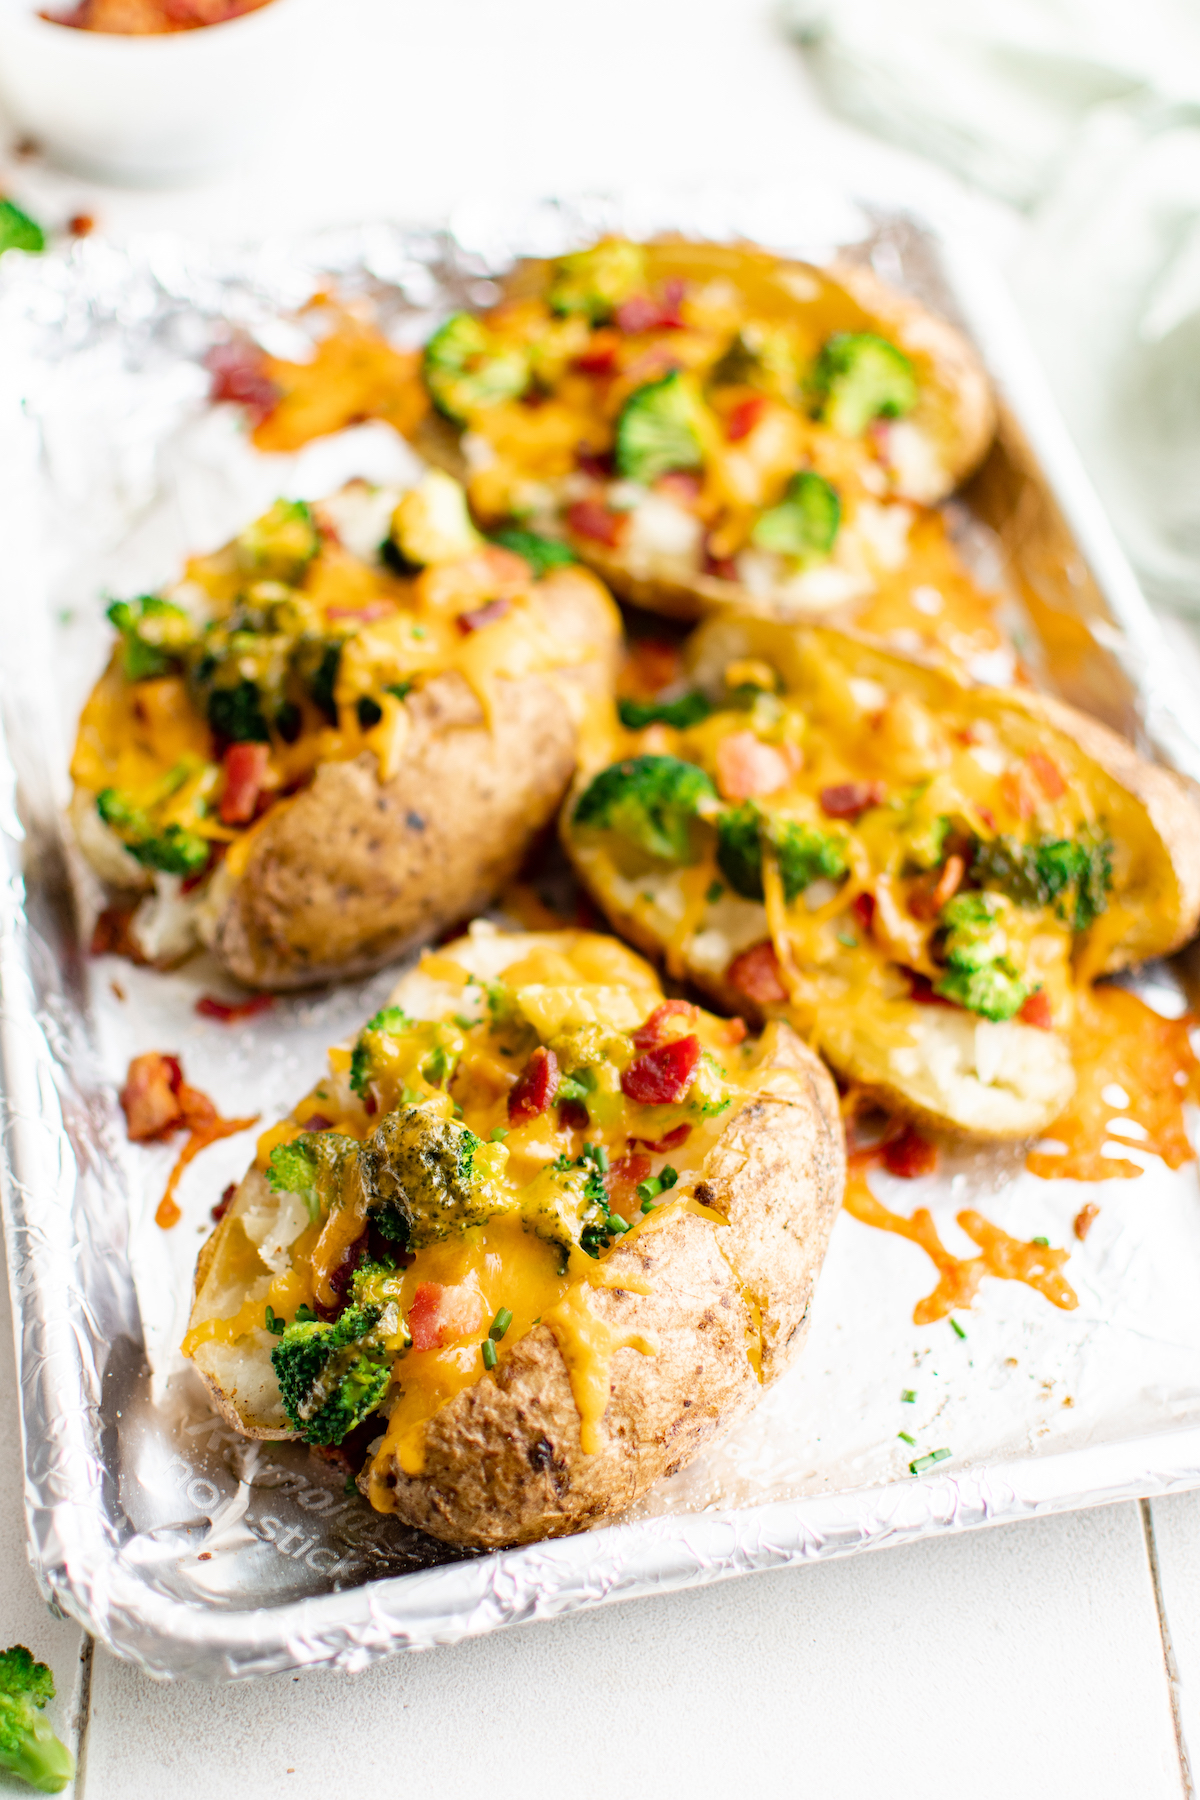 A foil lined sheet of baked potatoes with toppings.